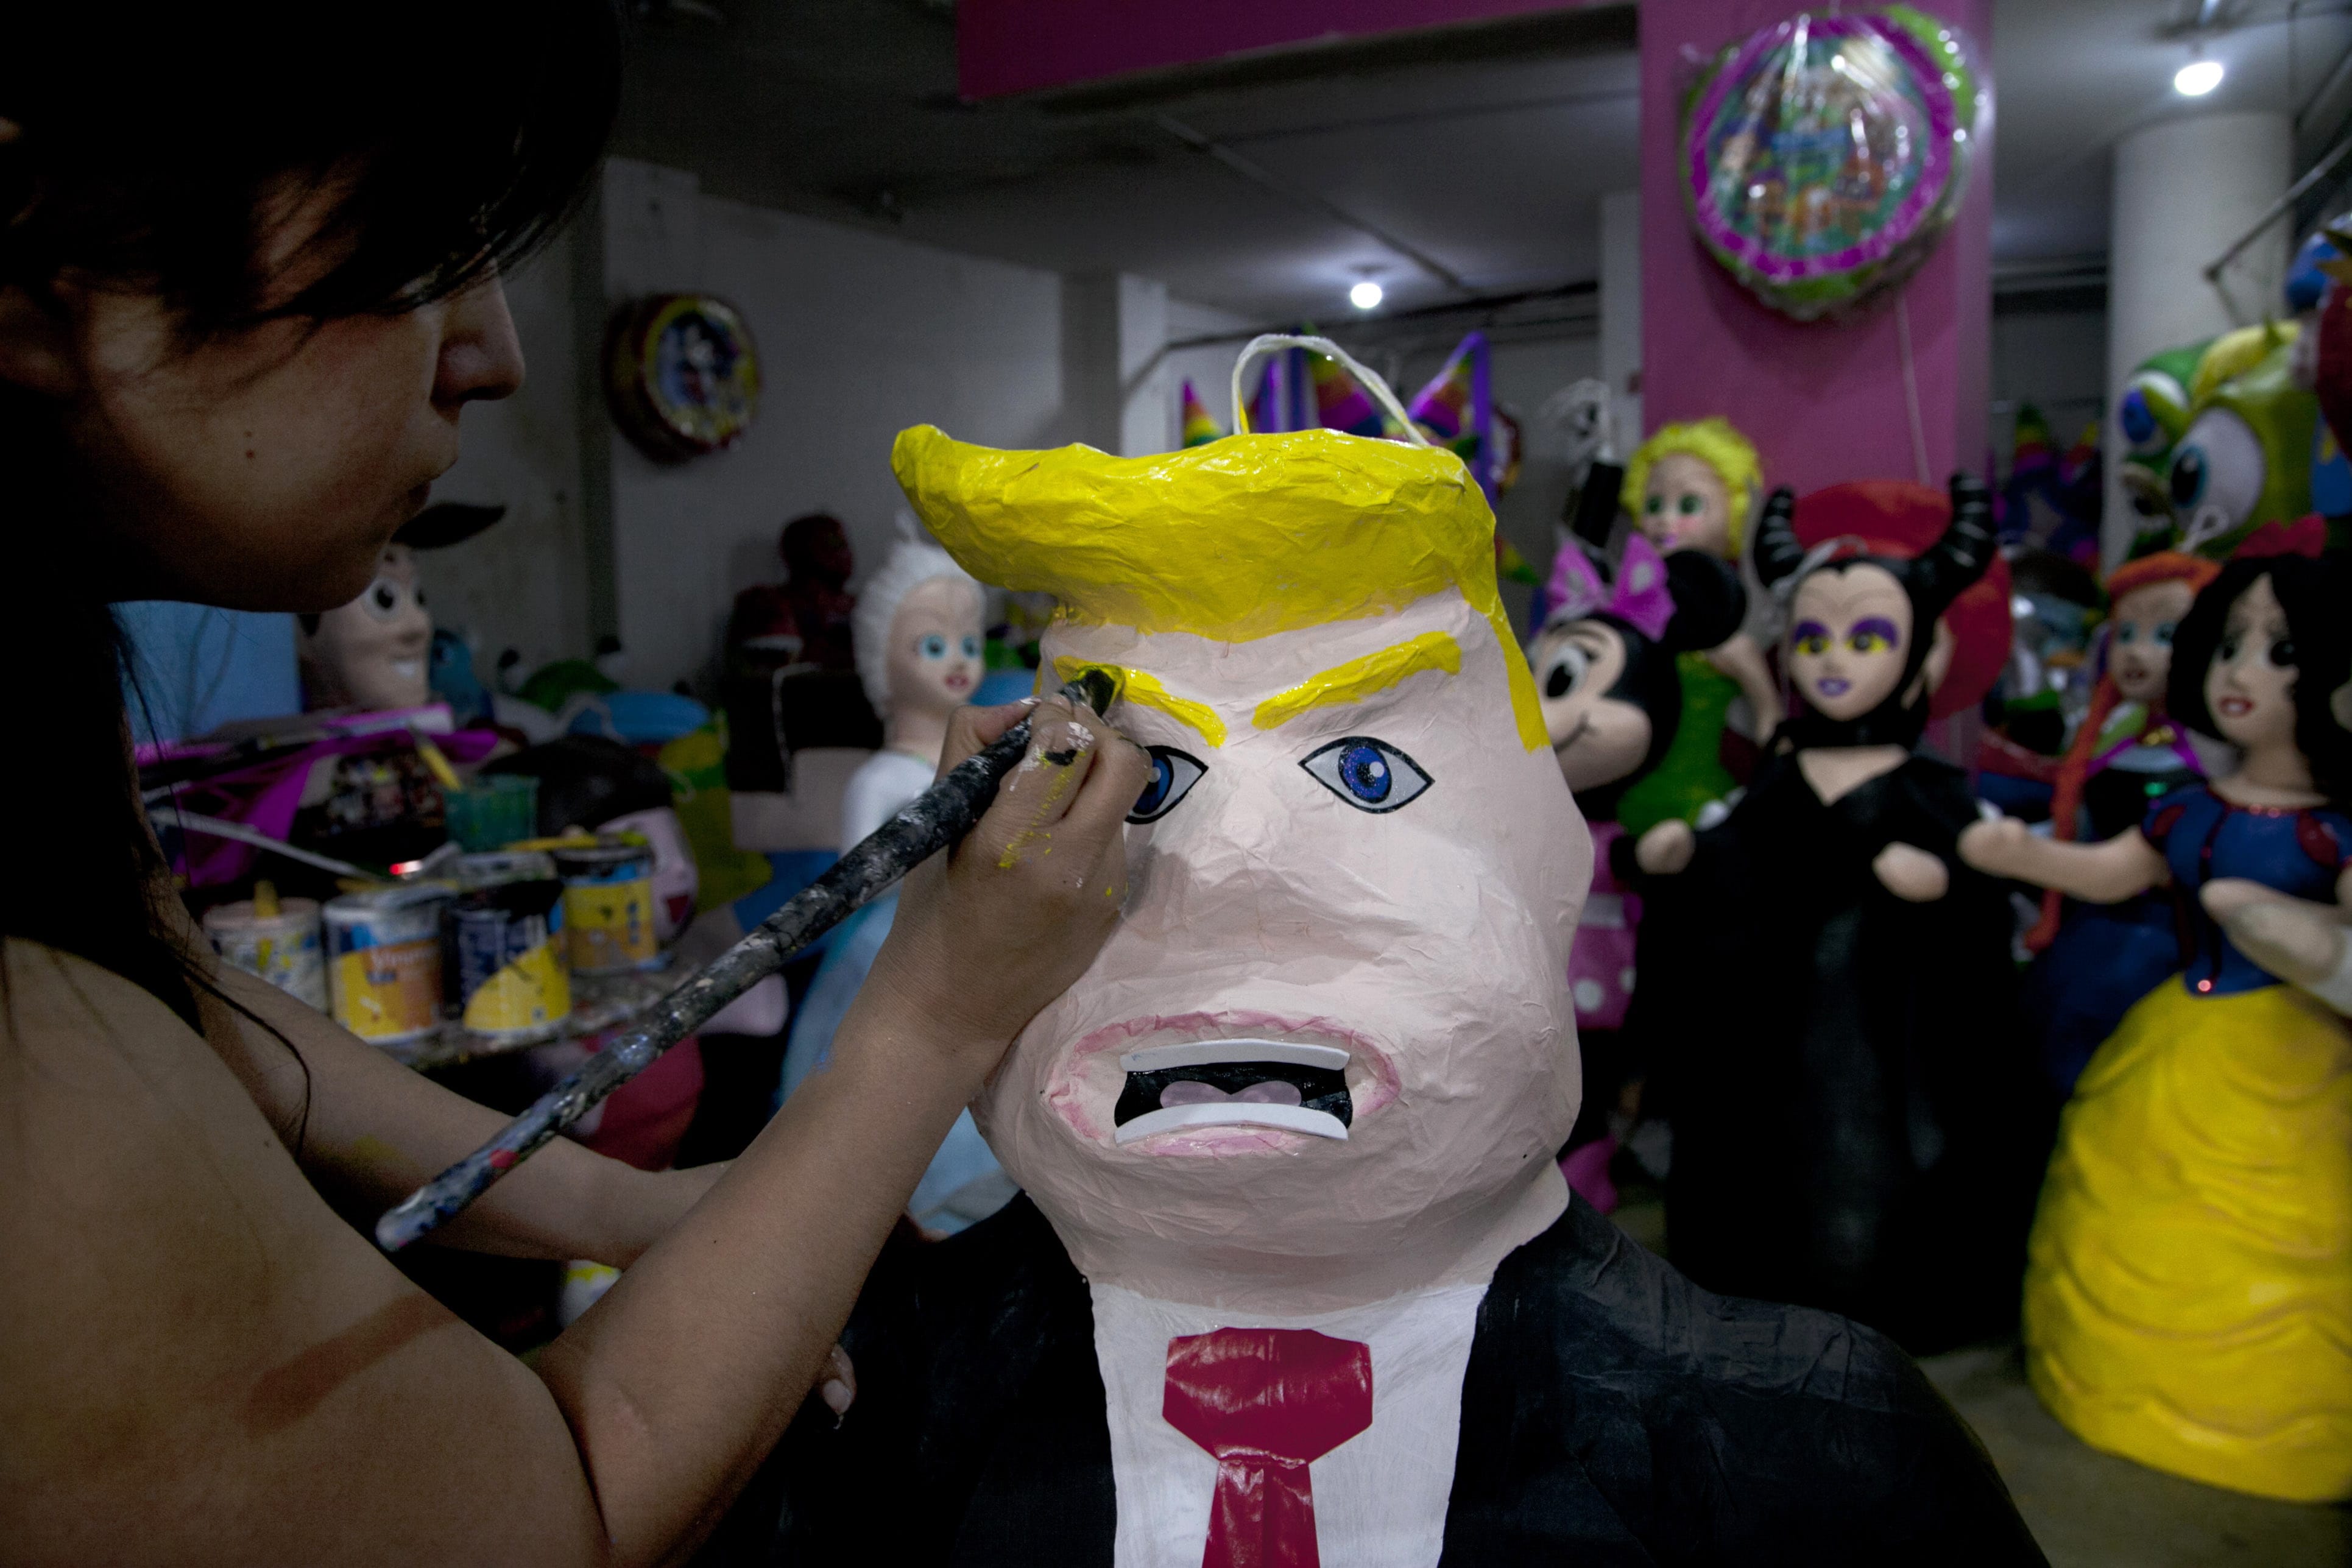 FILE - In this Friday, July 10, 2015 file photo, Alicia Lopez Fernandez paints a pinata depicting Donald Trump at her family's store "Pinatas Mena Banbolinos" in Mexico City. In a surprise move, Donald Trump will travel to Mexico on Wednesday, Aug. 31, to meet with President Enrique Pena Nieto, just hours before the Republican delivers a highly anticipated speech on immigration. Pena Nieto has been sharply critical of Trump's original immigration policy and compared his language to that of dictators Adolf Hitler and Benito Mussolini, saying it had hurt U.S.-Mexico relations.